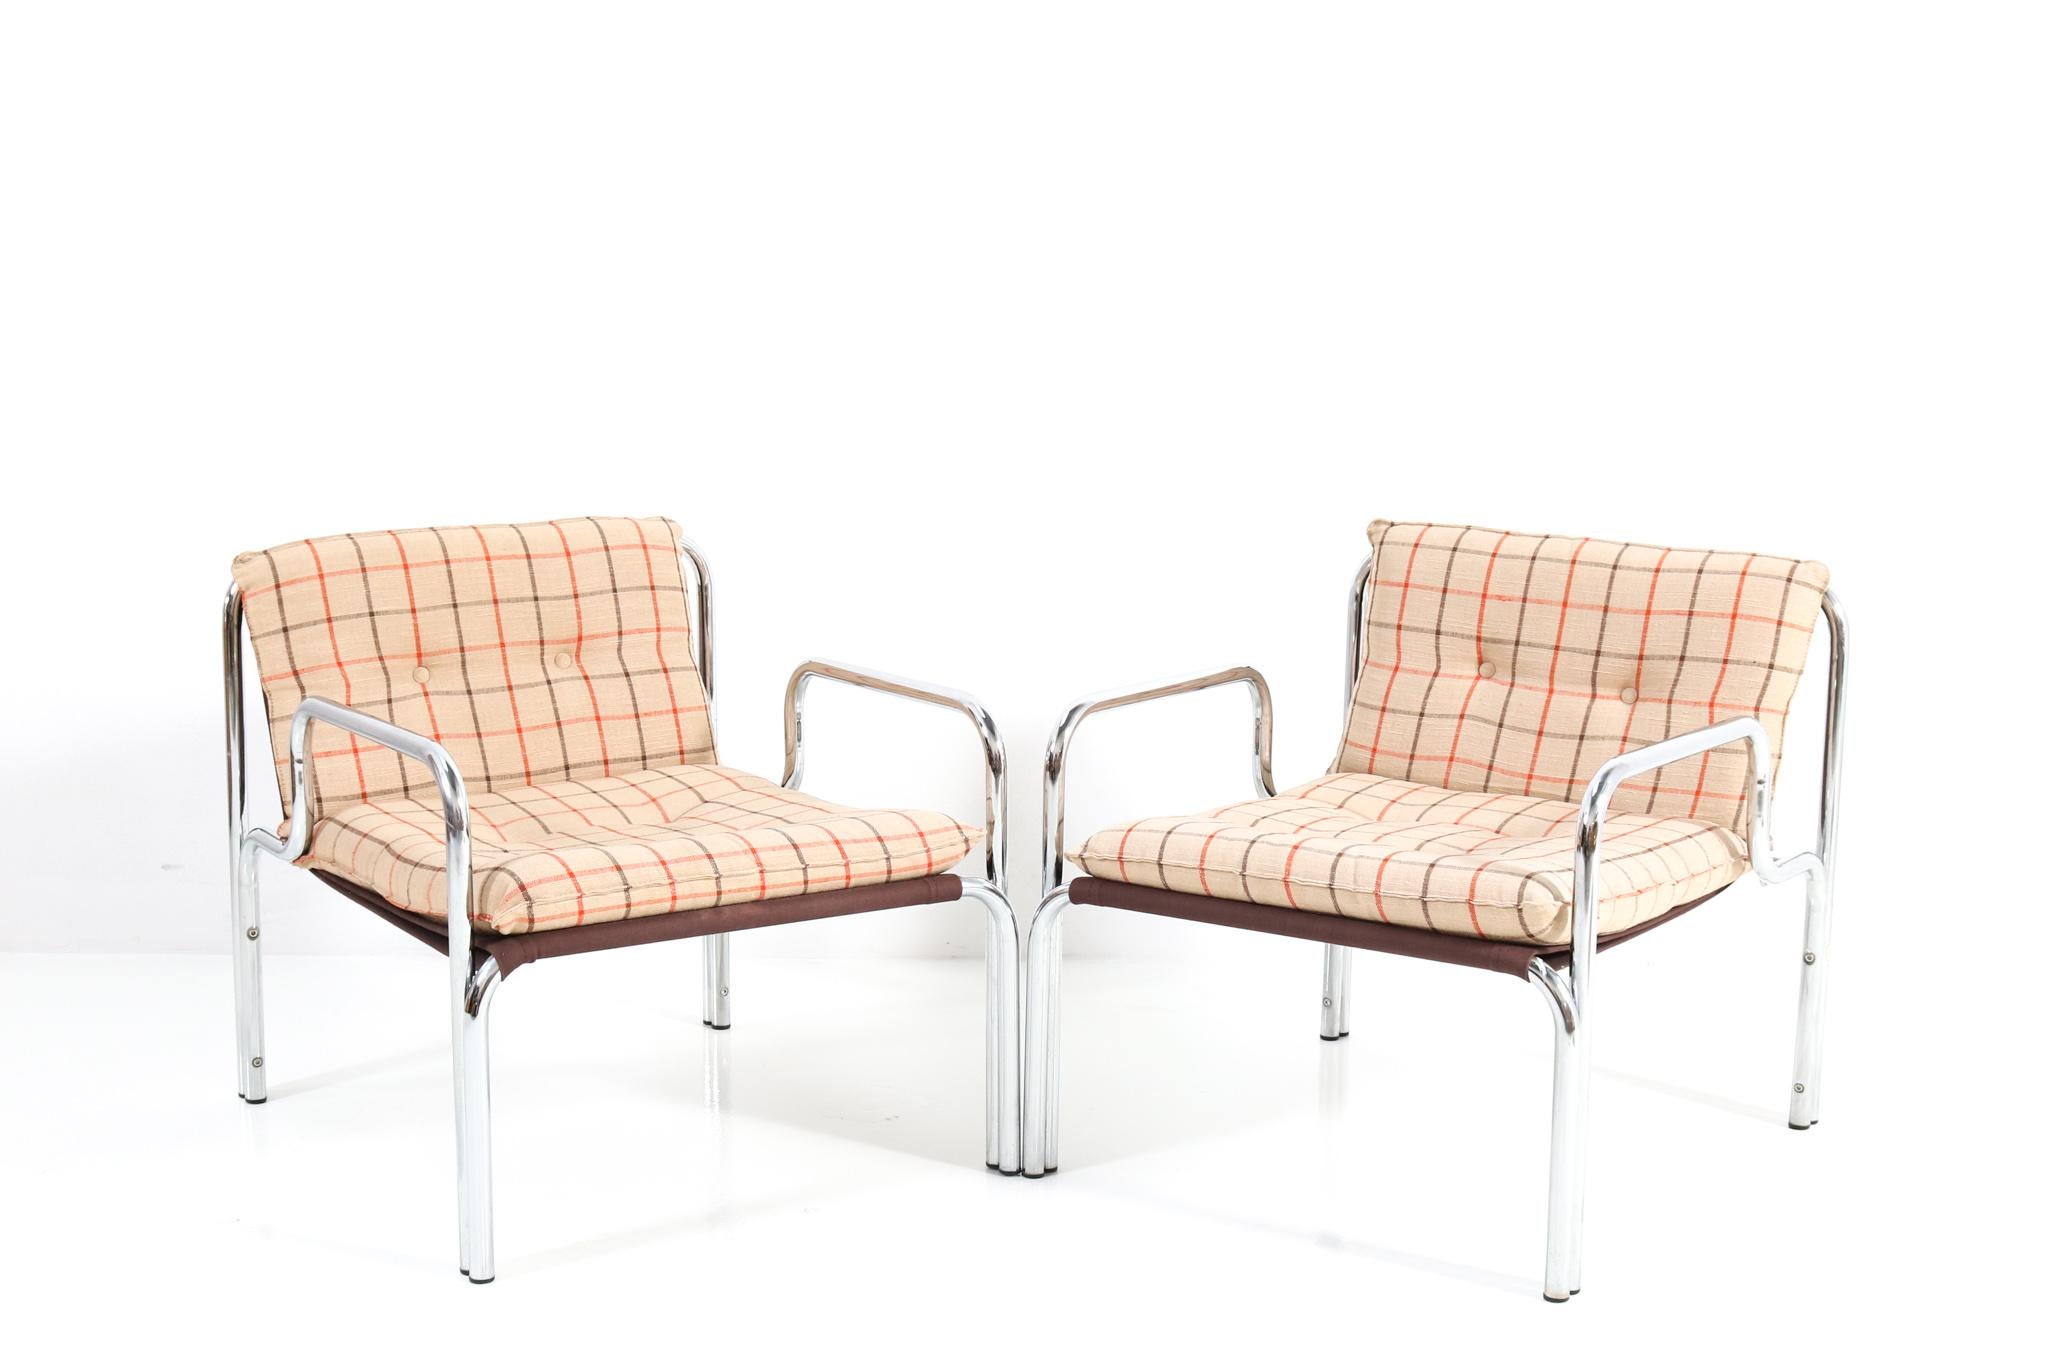 Dutch Pair of Mid-Century Modern Lounge Chairs by Wim Ypma for Riemersma, 1973